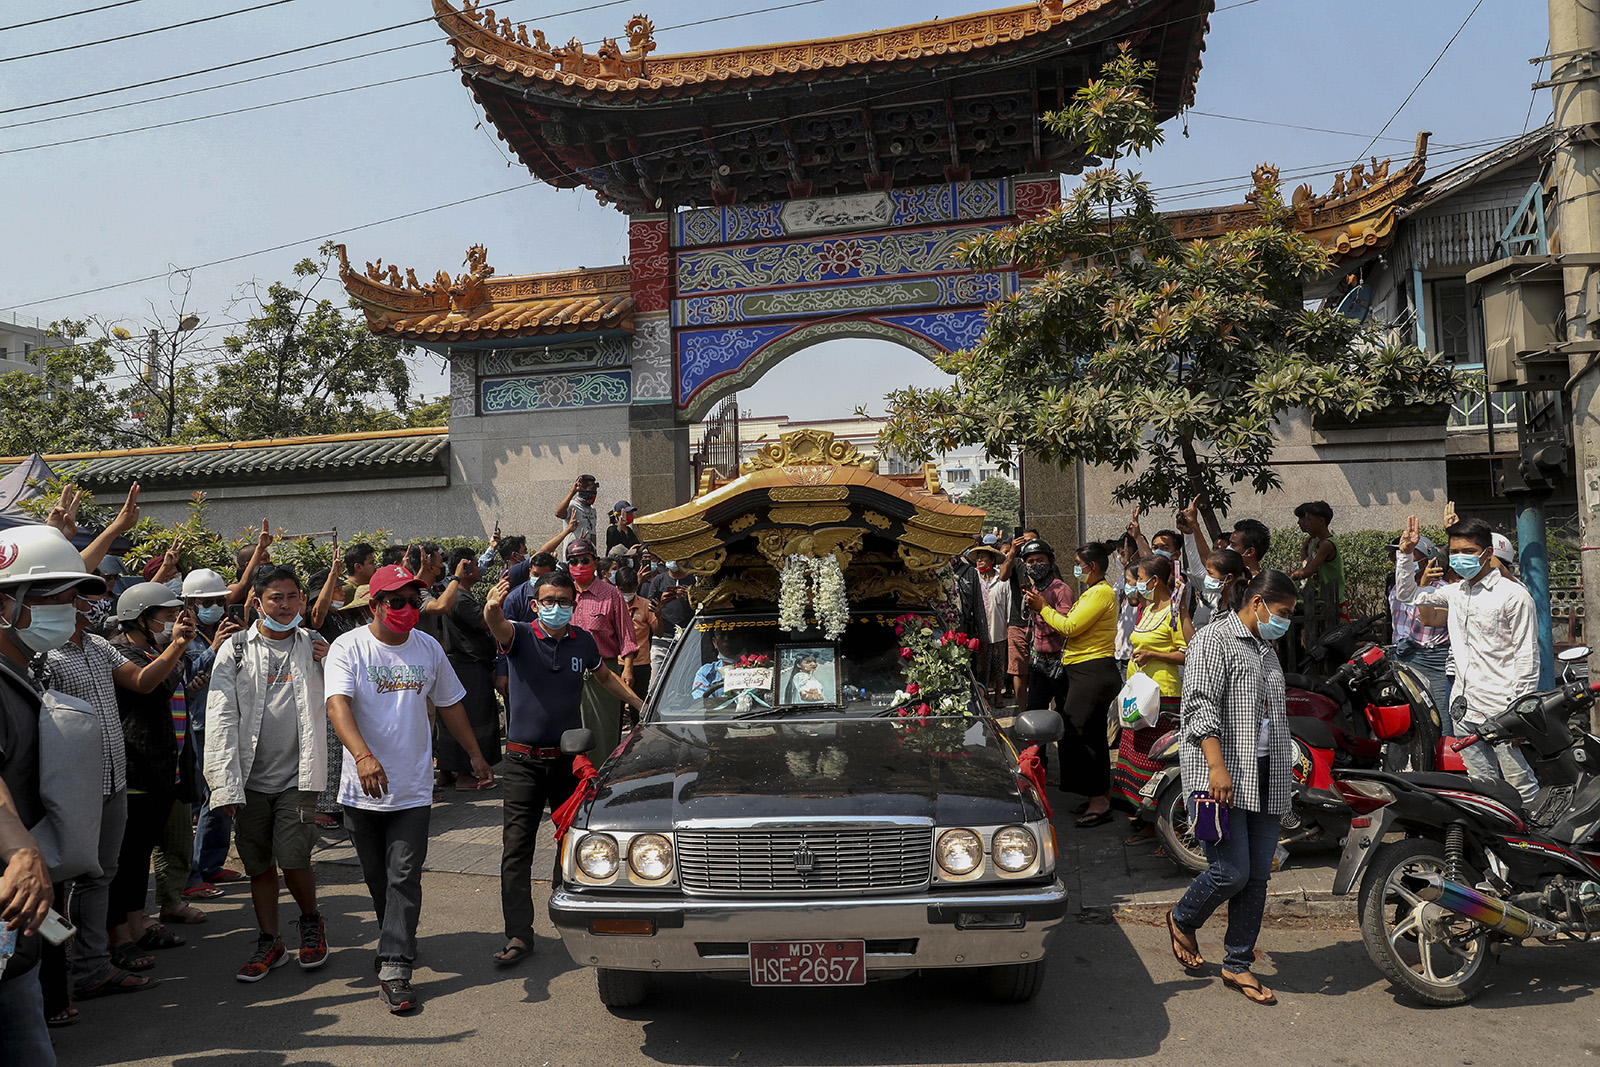 Bystanders flash a three-fingered sign of resistance as the body of Kyal Sin, also known by her Chinese name Deng Jia Xi, is driven out from the Yunnan Chinese temple in Mandalay, Myanmar, Thursday, March 4, 2021. Kyal Sin was shot in the head by Myanmar security forces during an anti-coup protest rally she was attending Wednesday. (AP Photo)